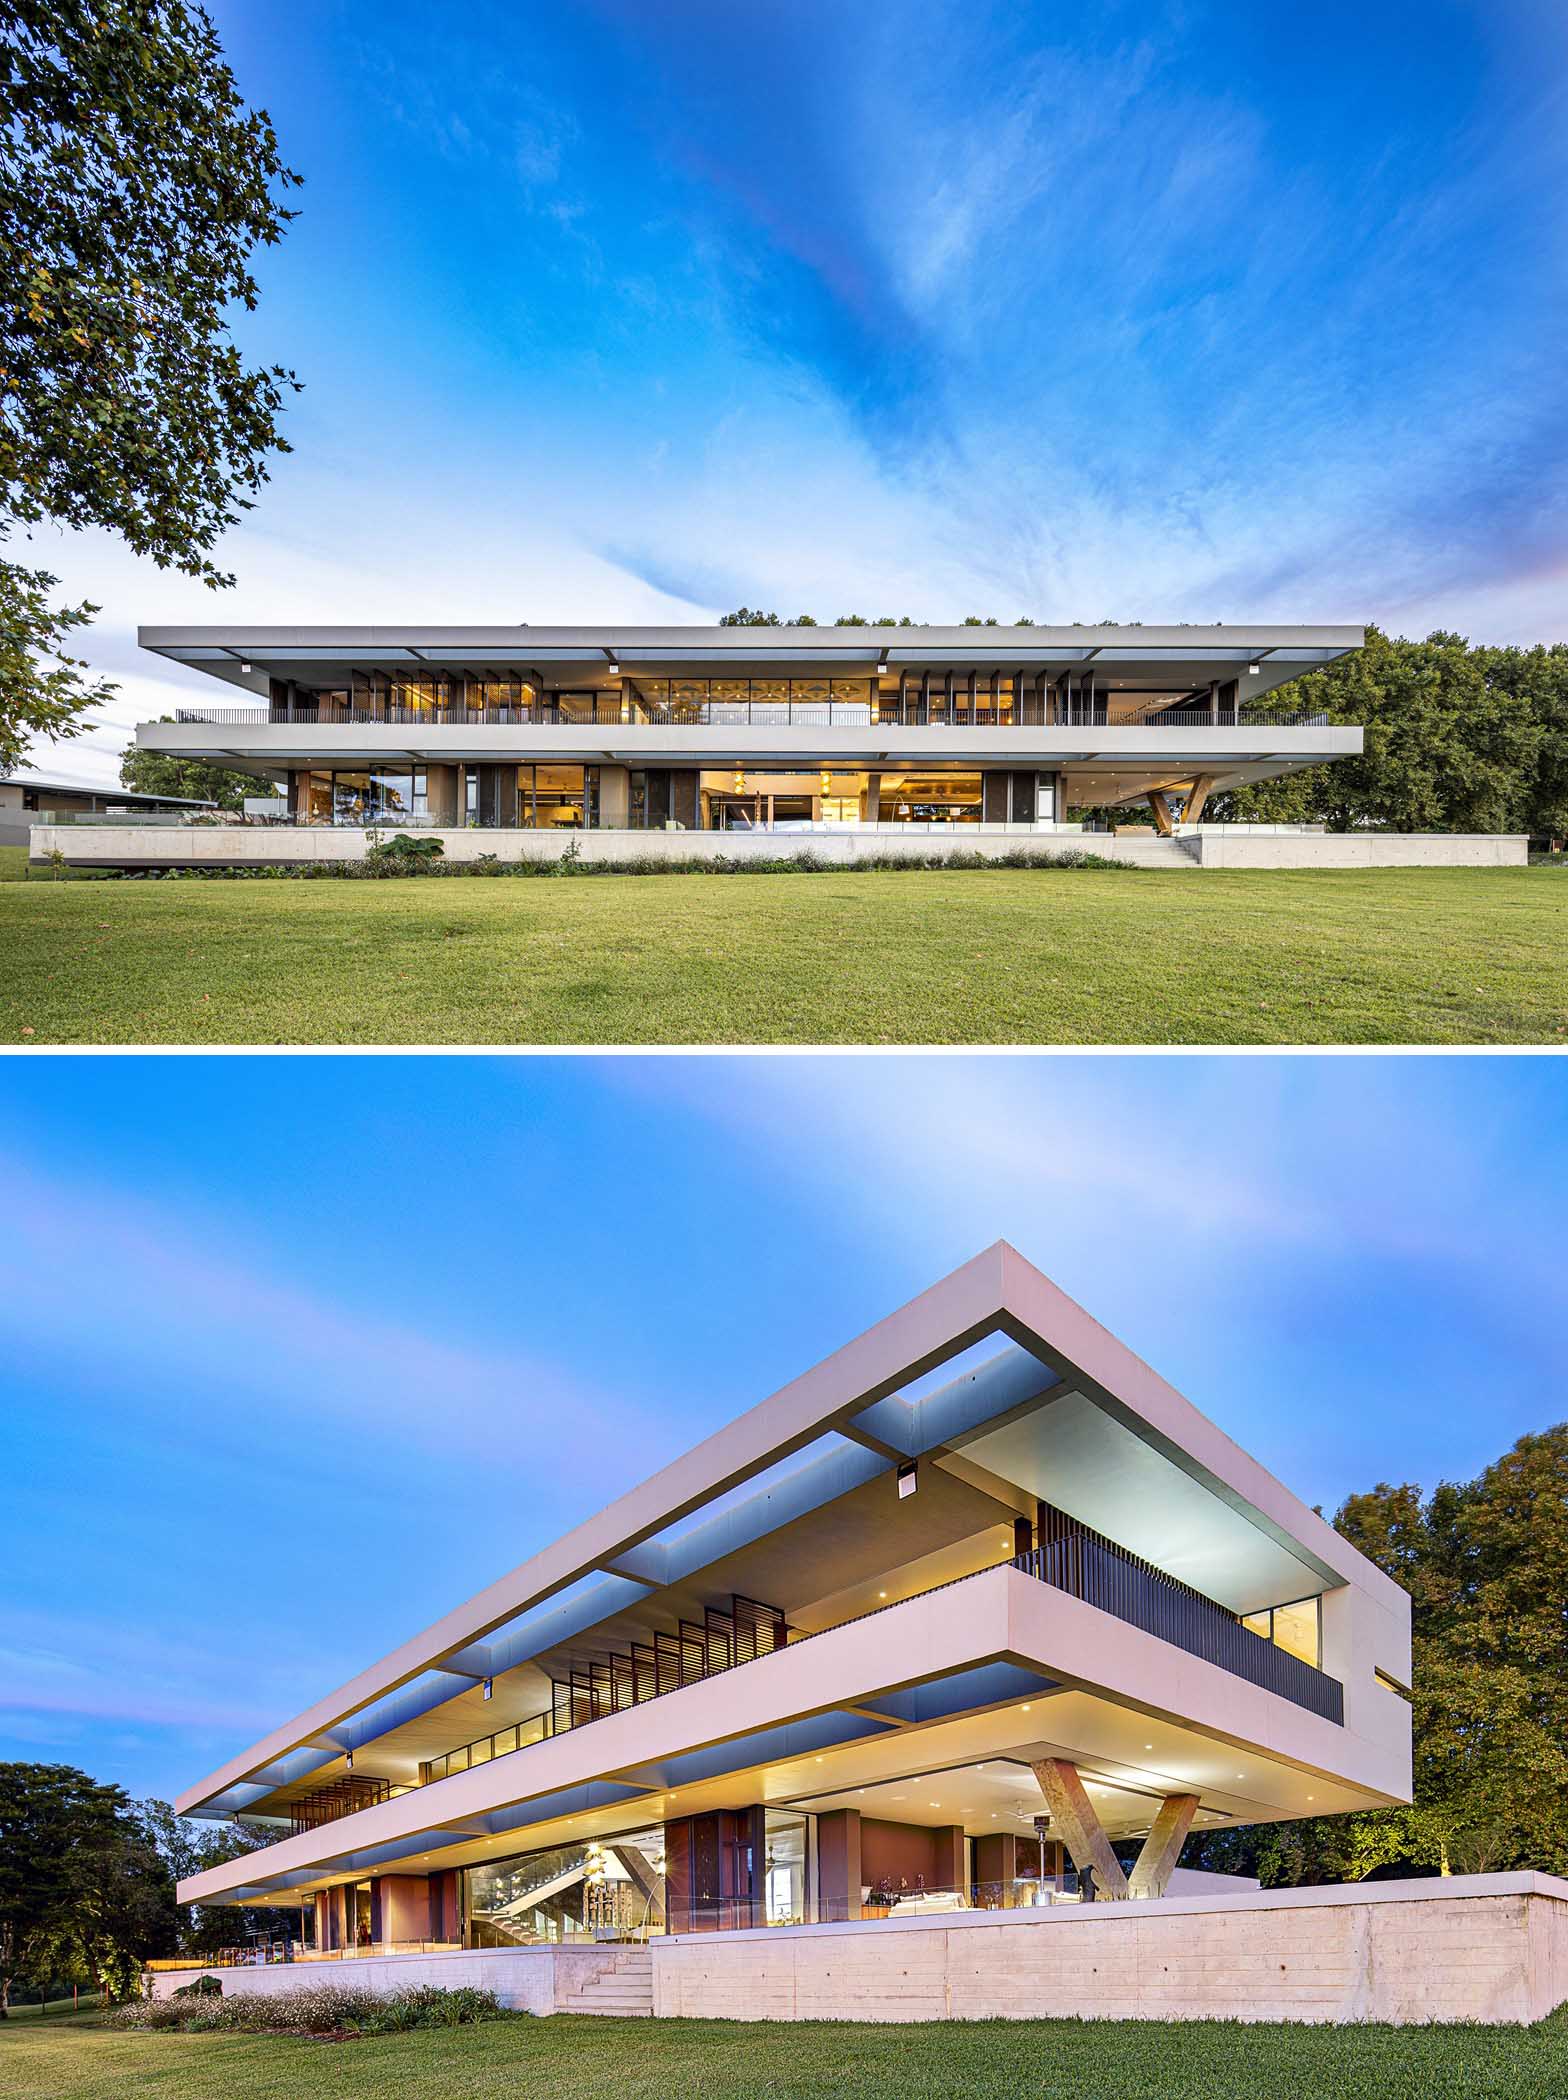 The design of this modern home takes on a simple arrangement of monolithic linear forms that project out across the vast manicured lawn and gently sloping paddocks.